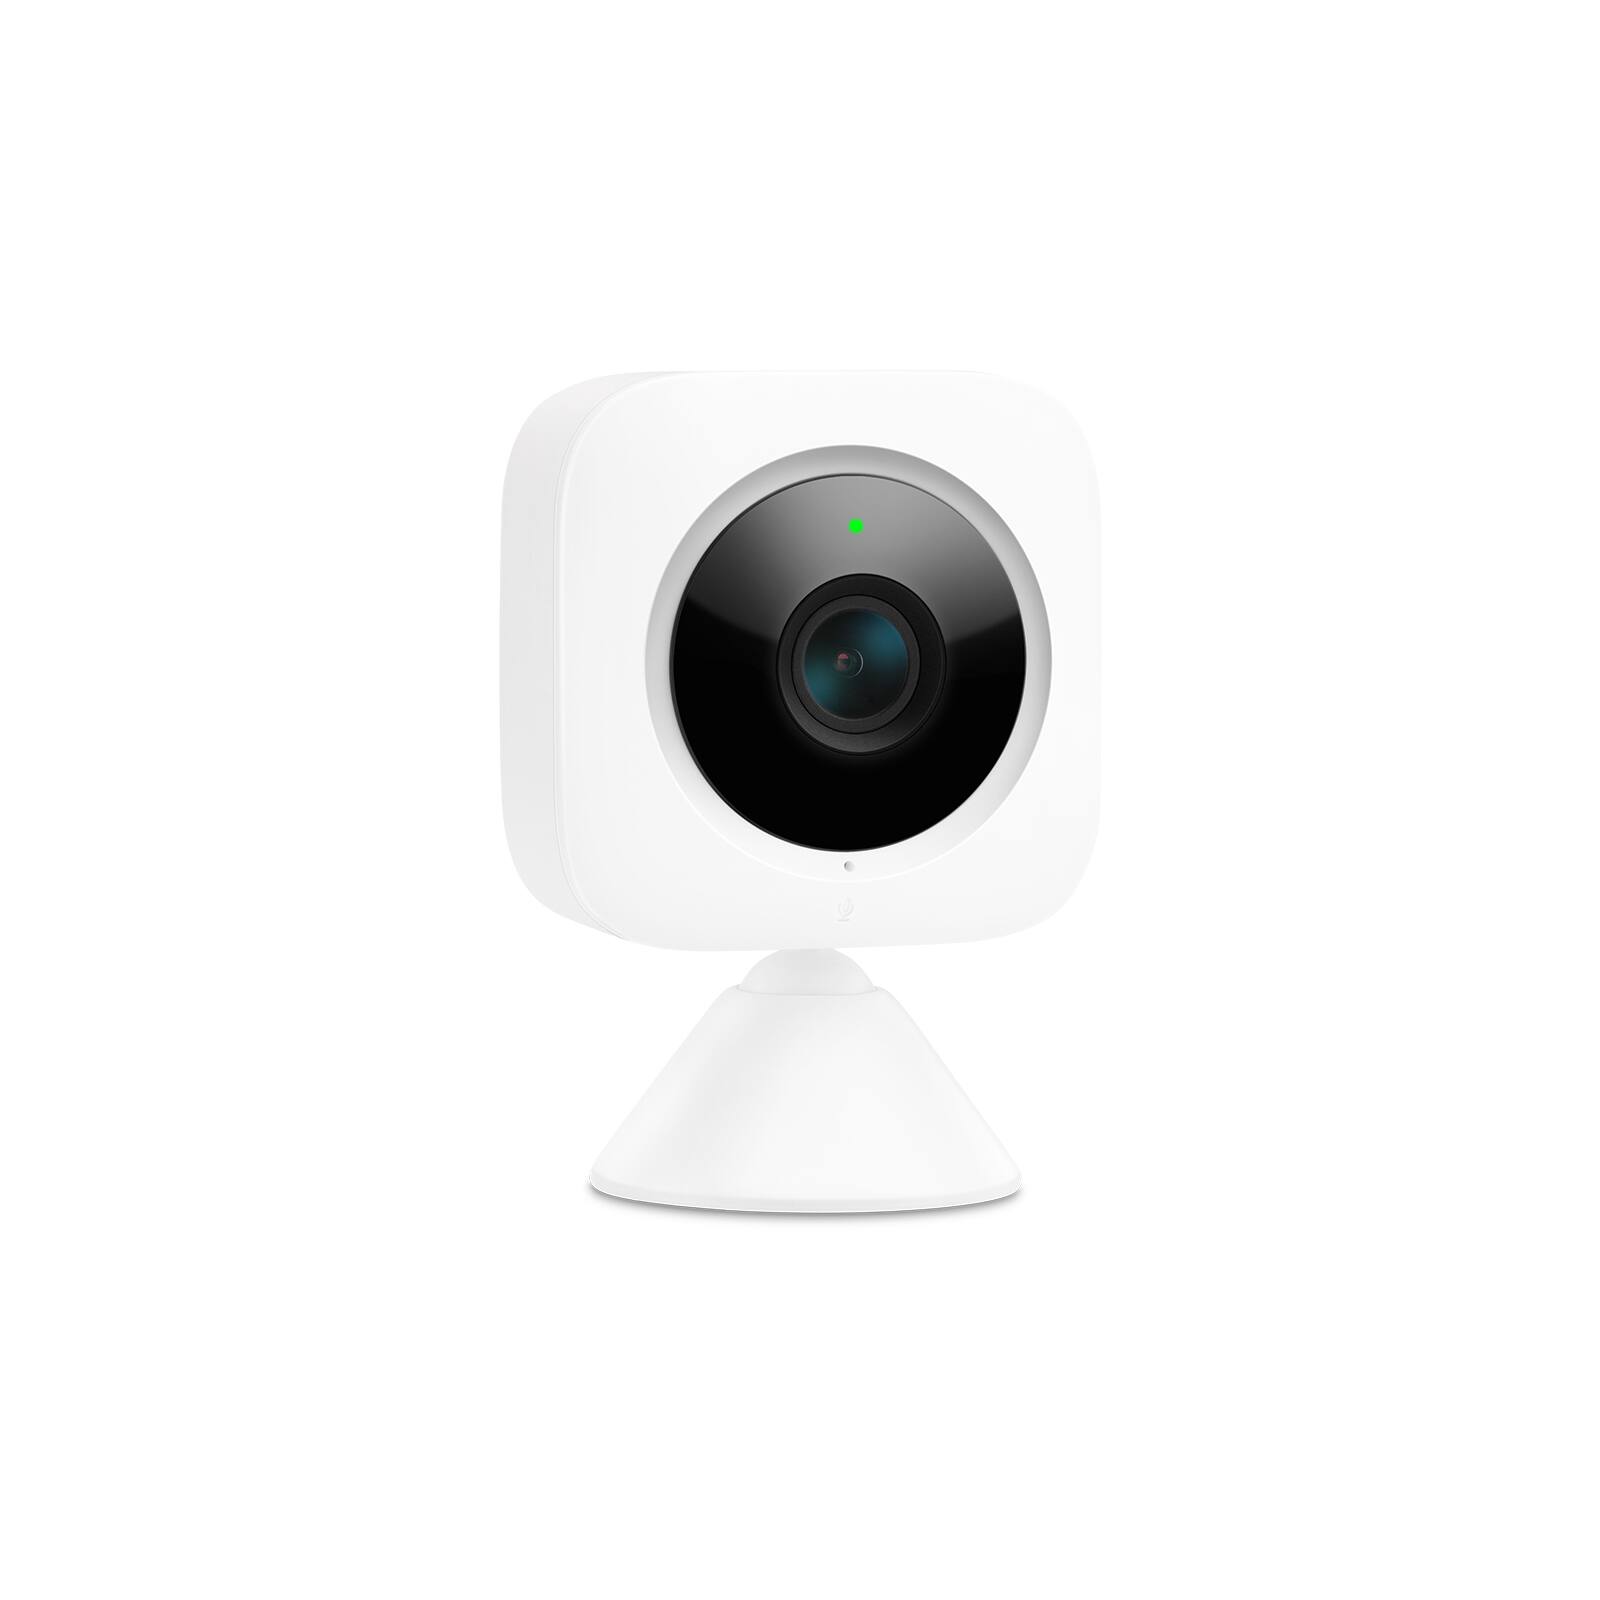 SwitchBot Smart Indoor WiFi Security 1080p Camera $19.46 + Free Shipping w/ Prime or orders $25+